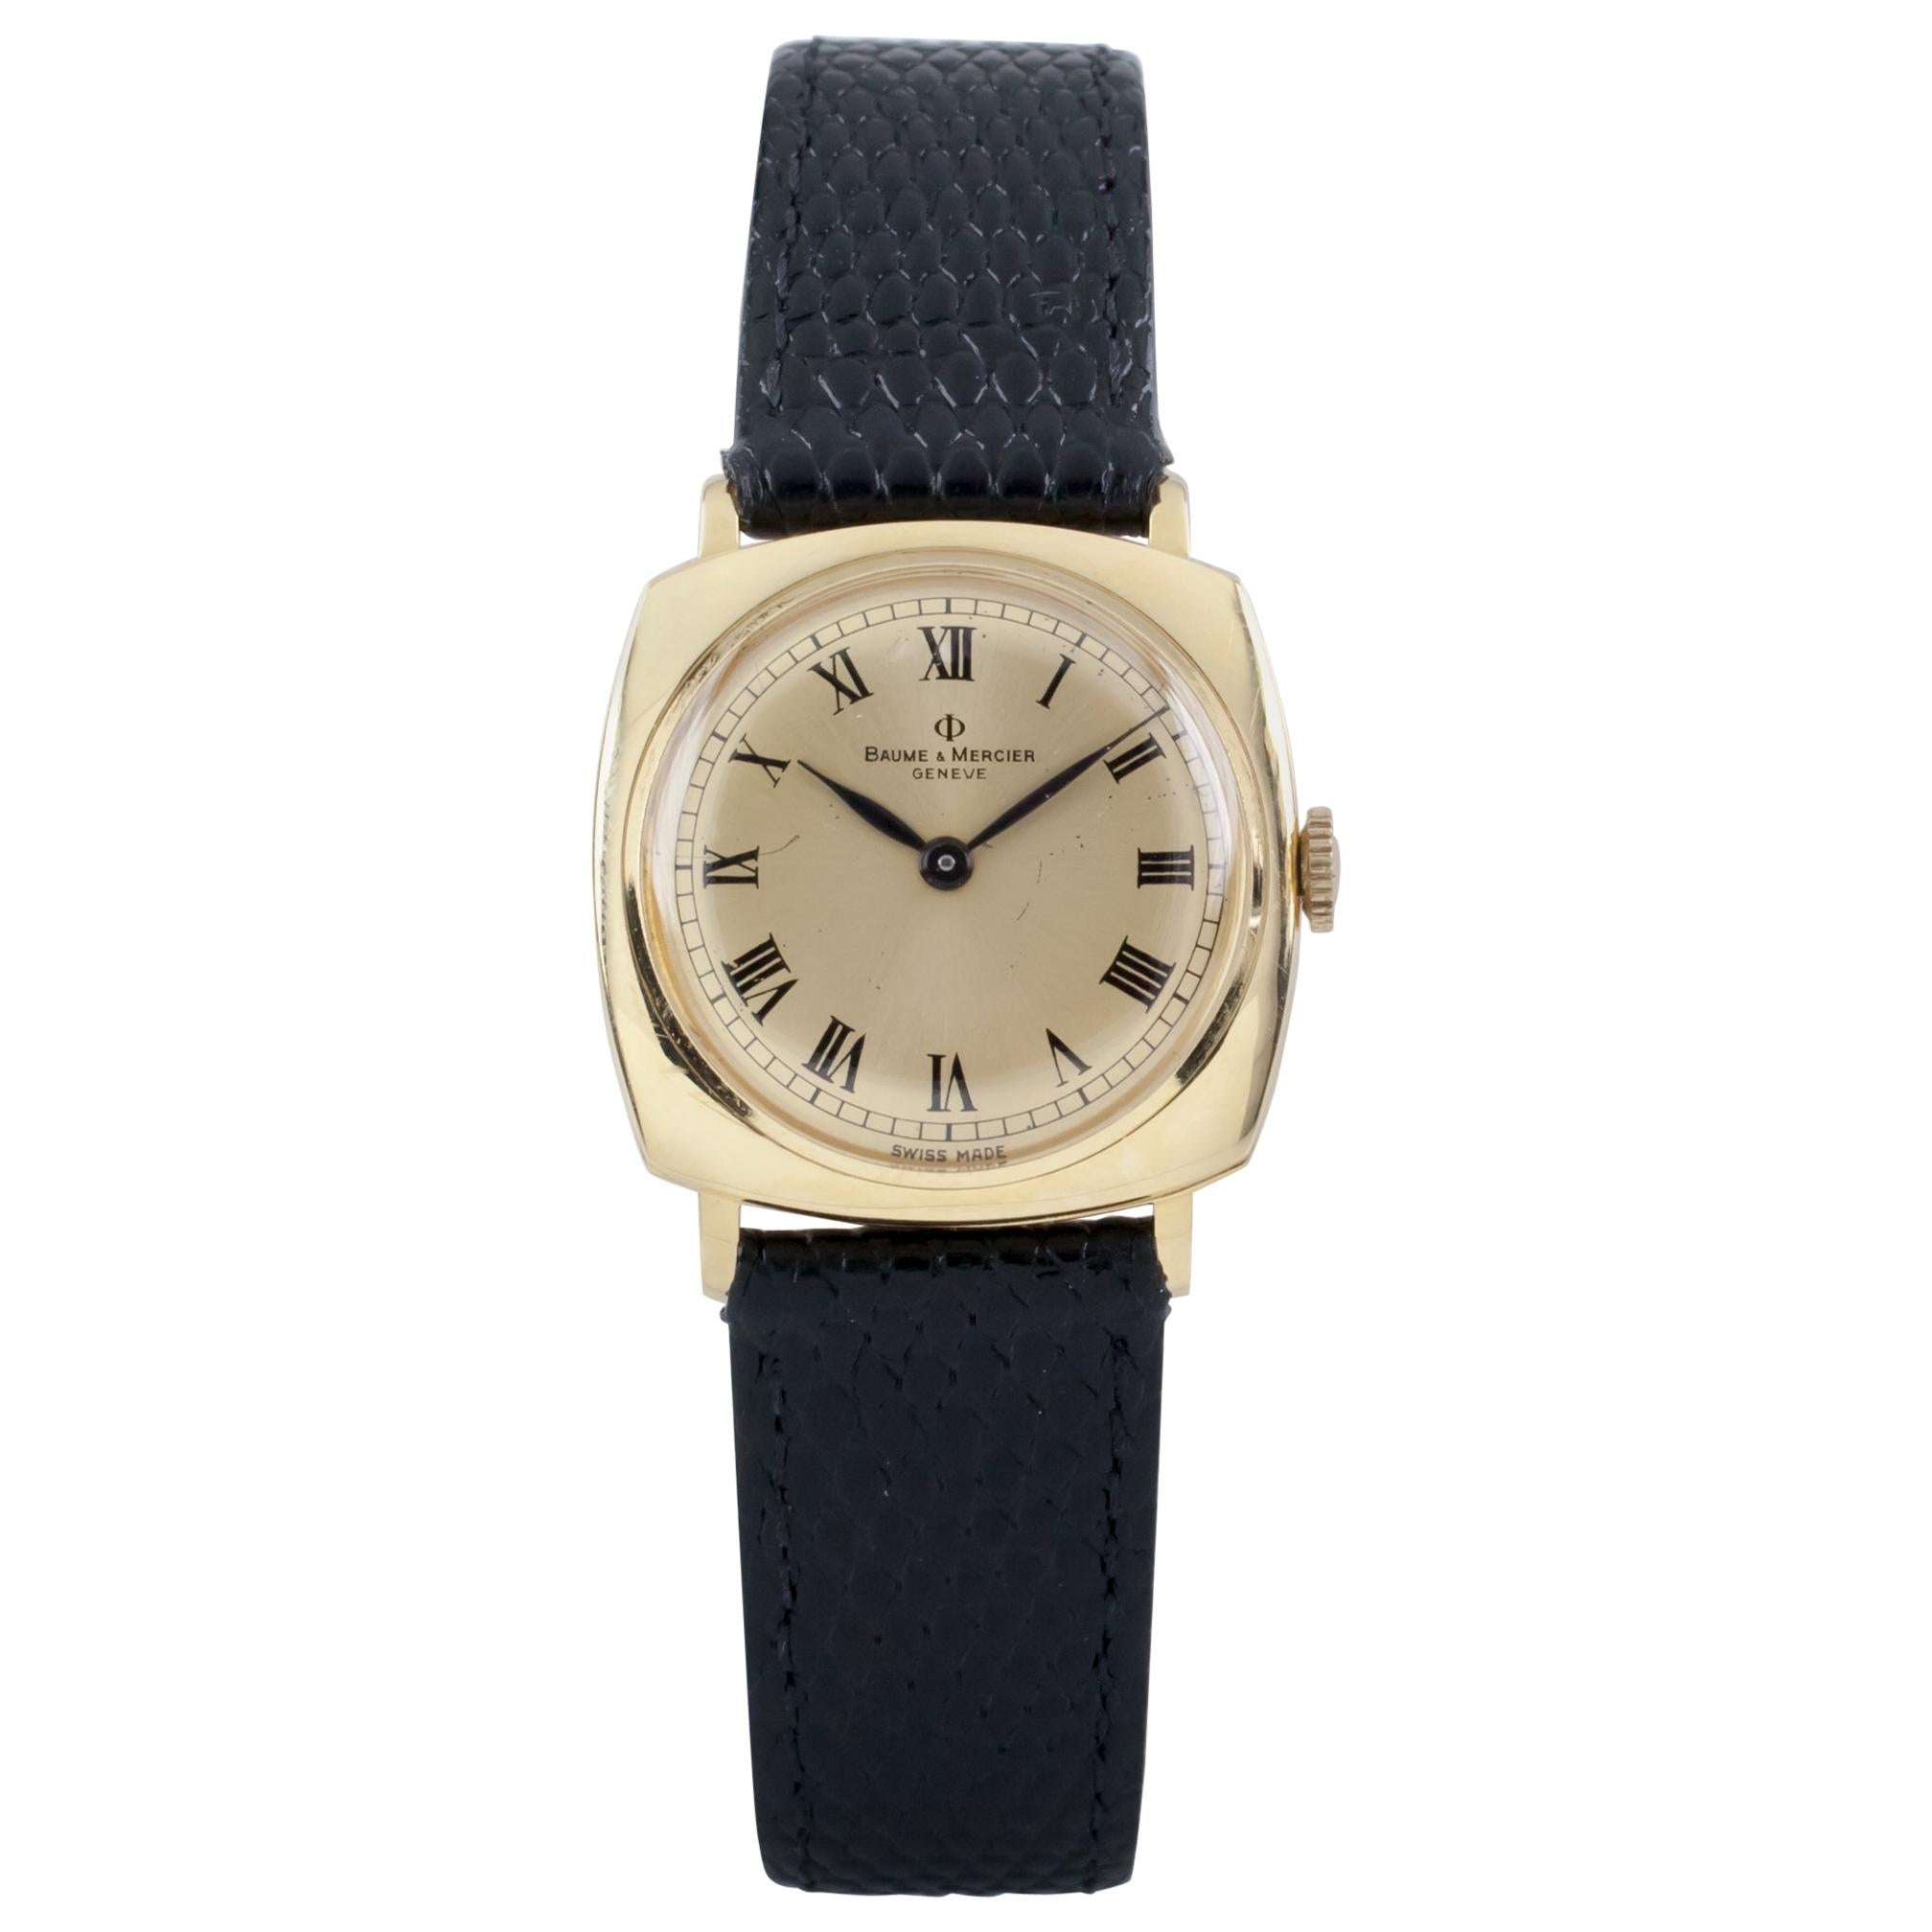 Baume & Mercier 18 Karat Gold Women's Hand-Winding Watch with Leather Band